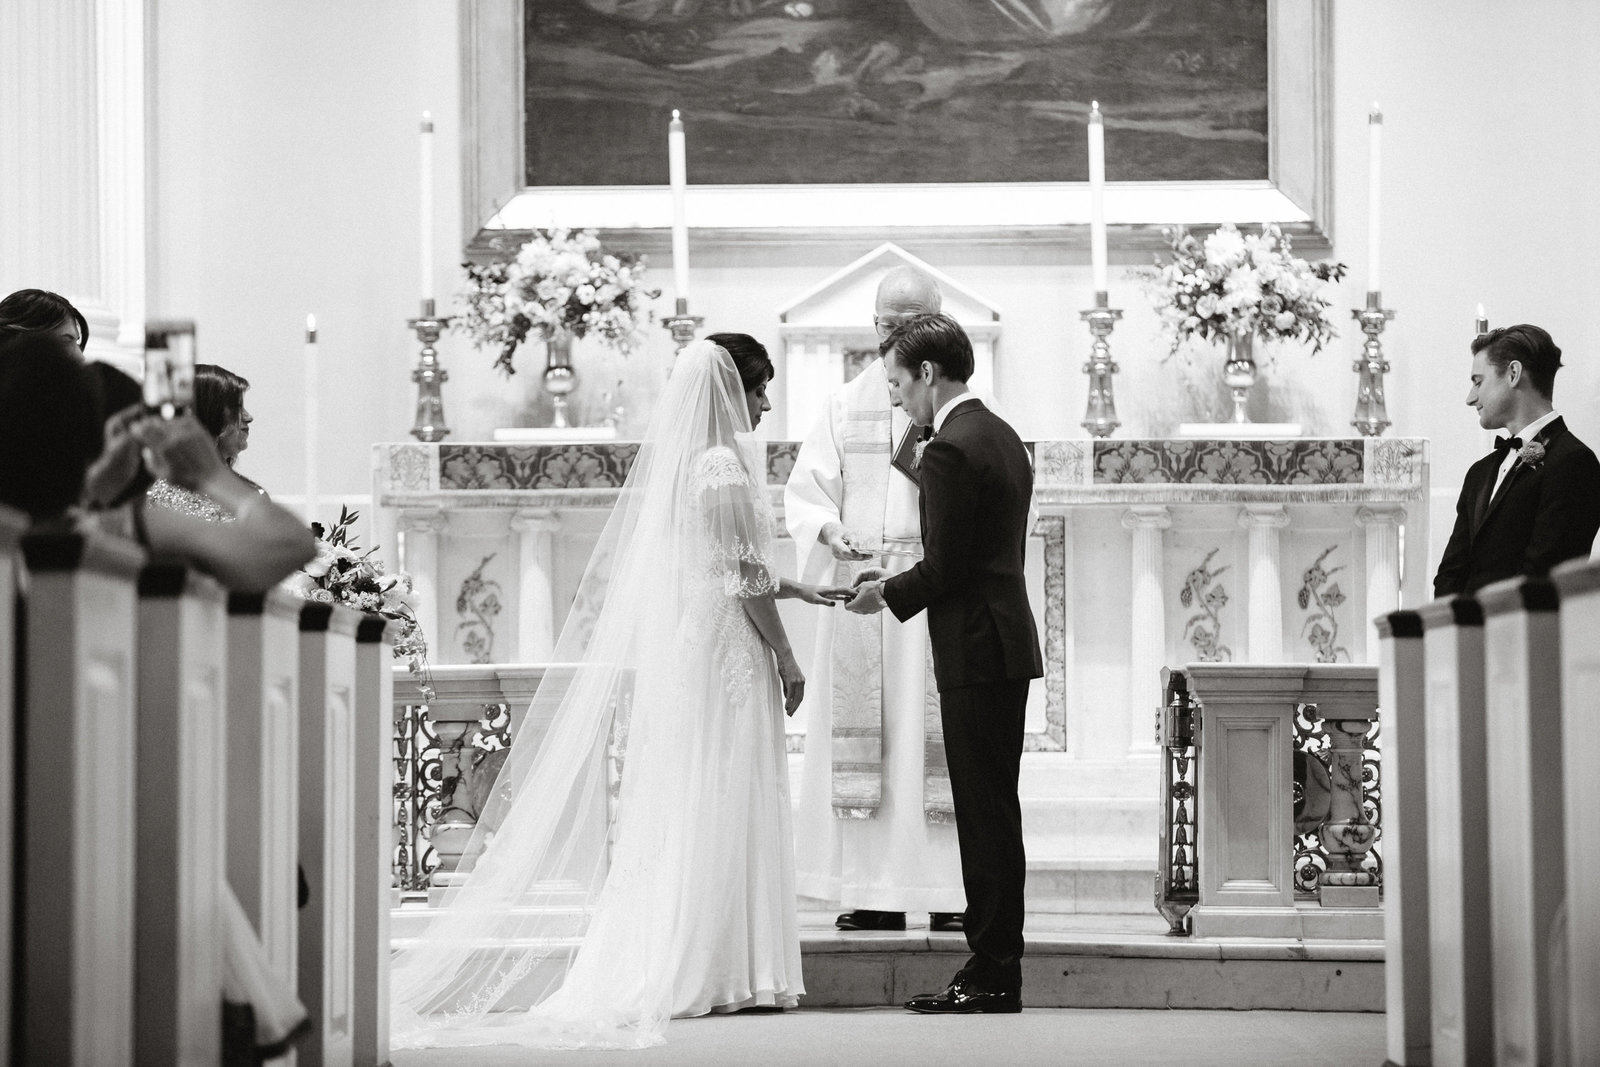 Bride and groom exchanging vows at their church wedding ceremony in Philadelphia.